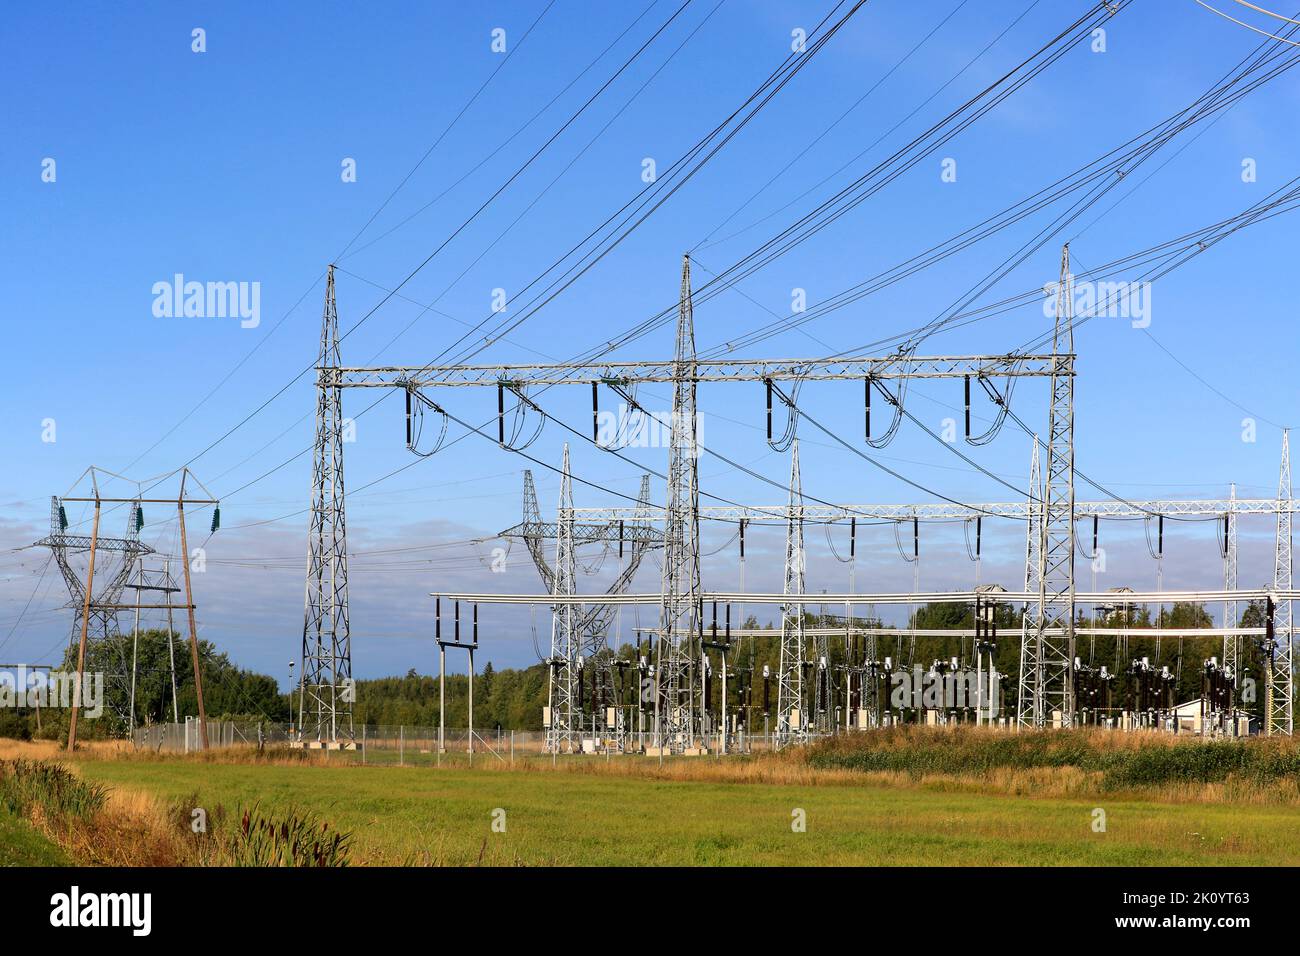 Electricity transmission substation and overhead transmission lines by Fingrid Oyj Forssa Reserve Power Plant. Forssa, Finland. September 9, 2022 Stock Photo